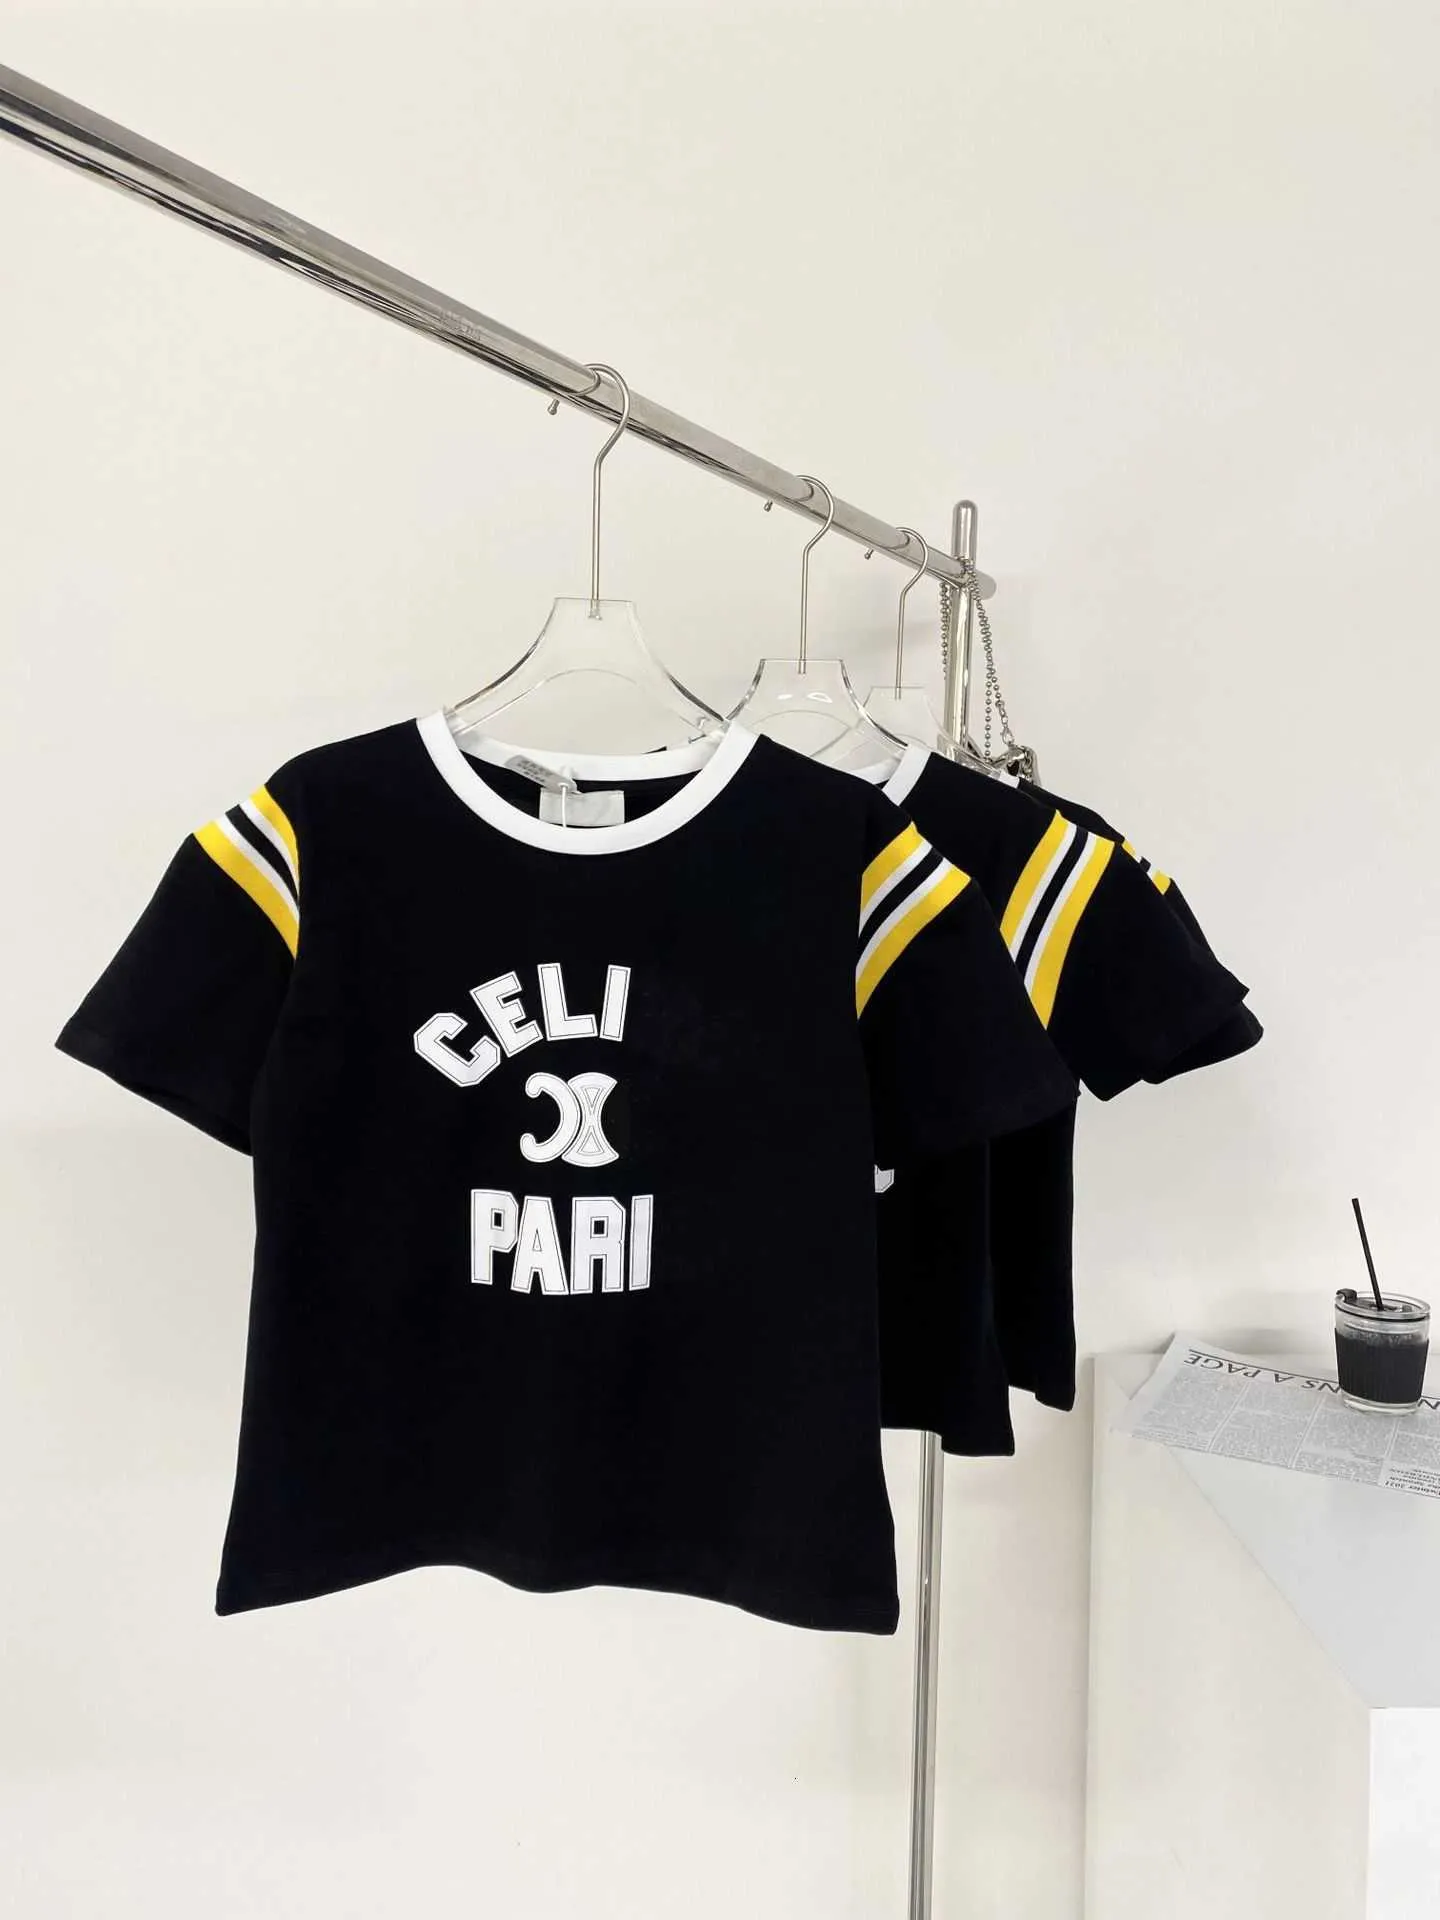 Womens T Men shirt Casual Tshirt Letter Print Tops Short Sleeve Shirts New Cotton Color Matching Knitted Academy Style Printed Panel Women's Versatile T-shirt